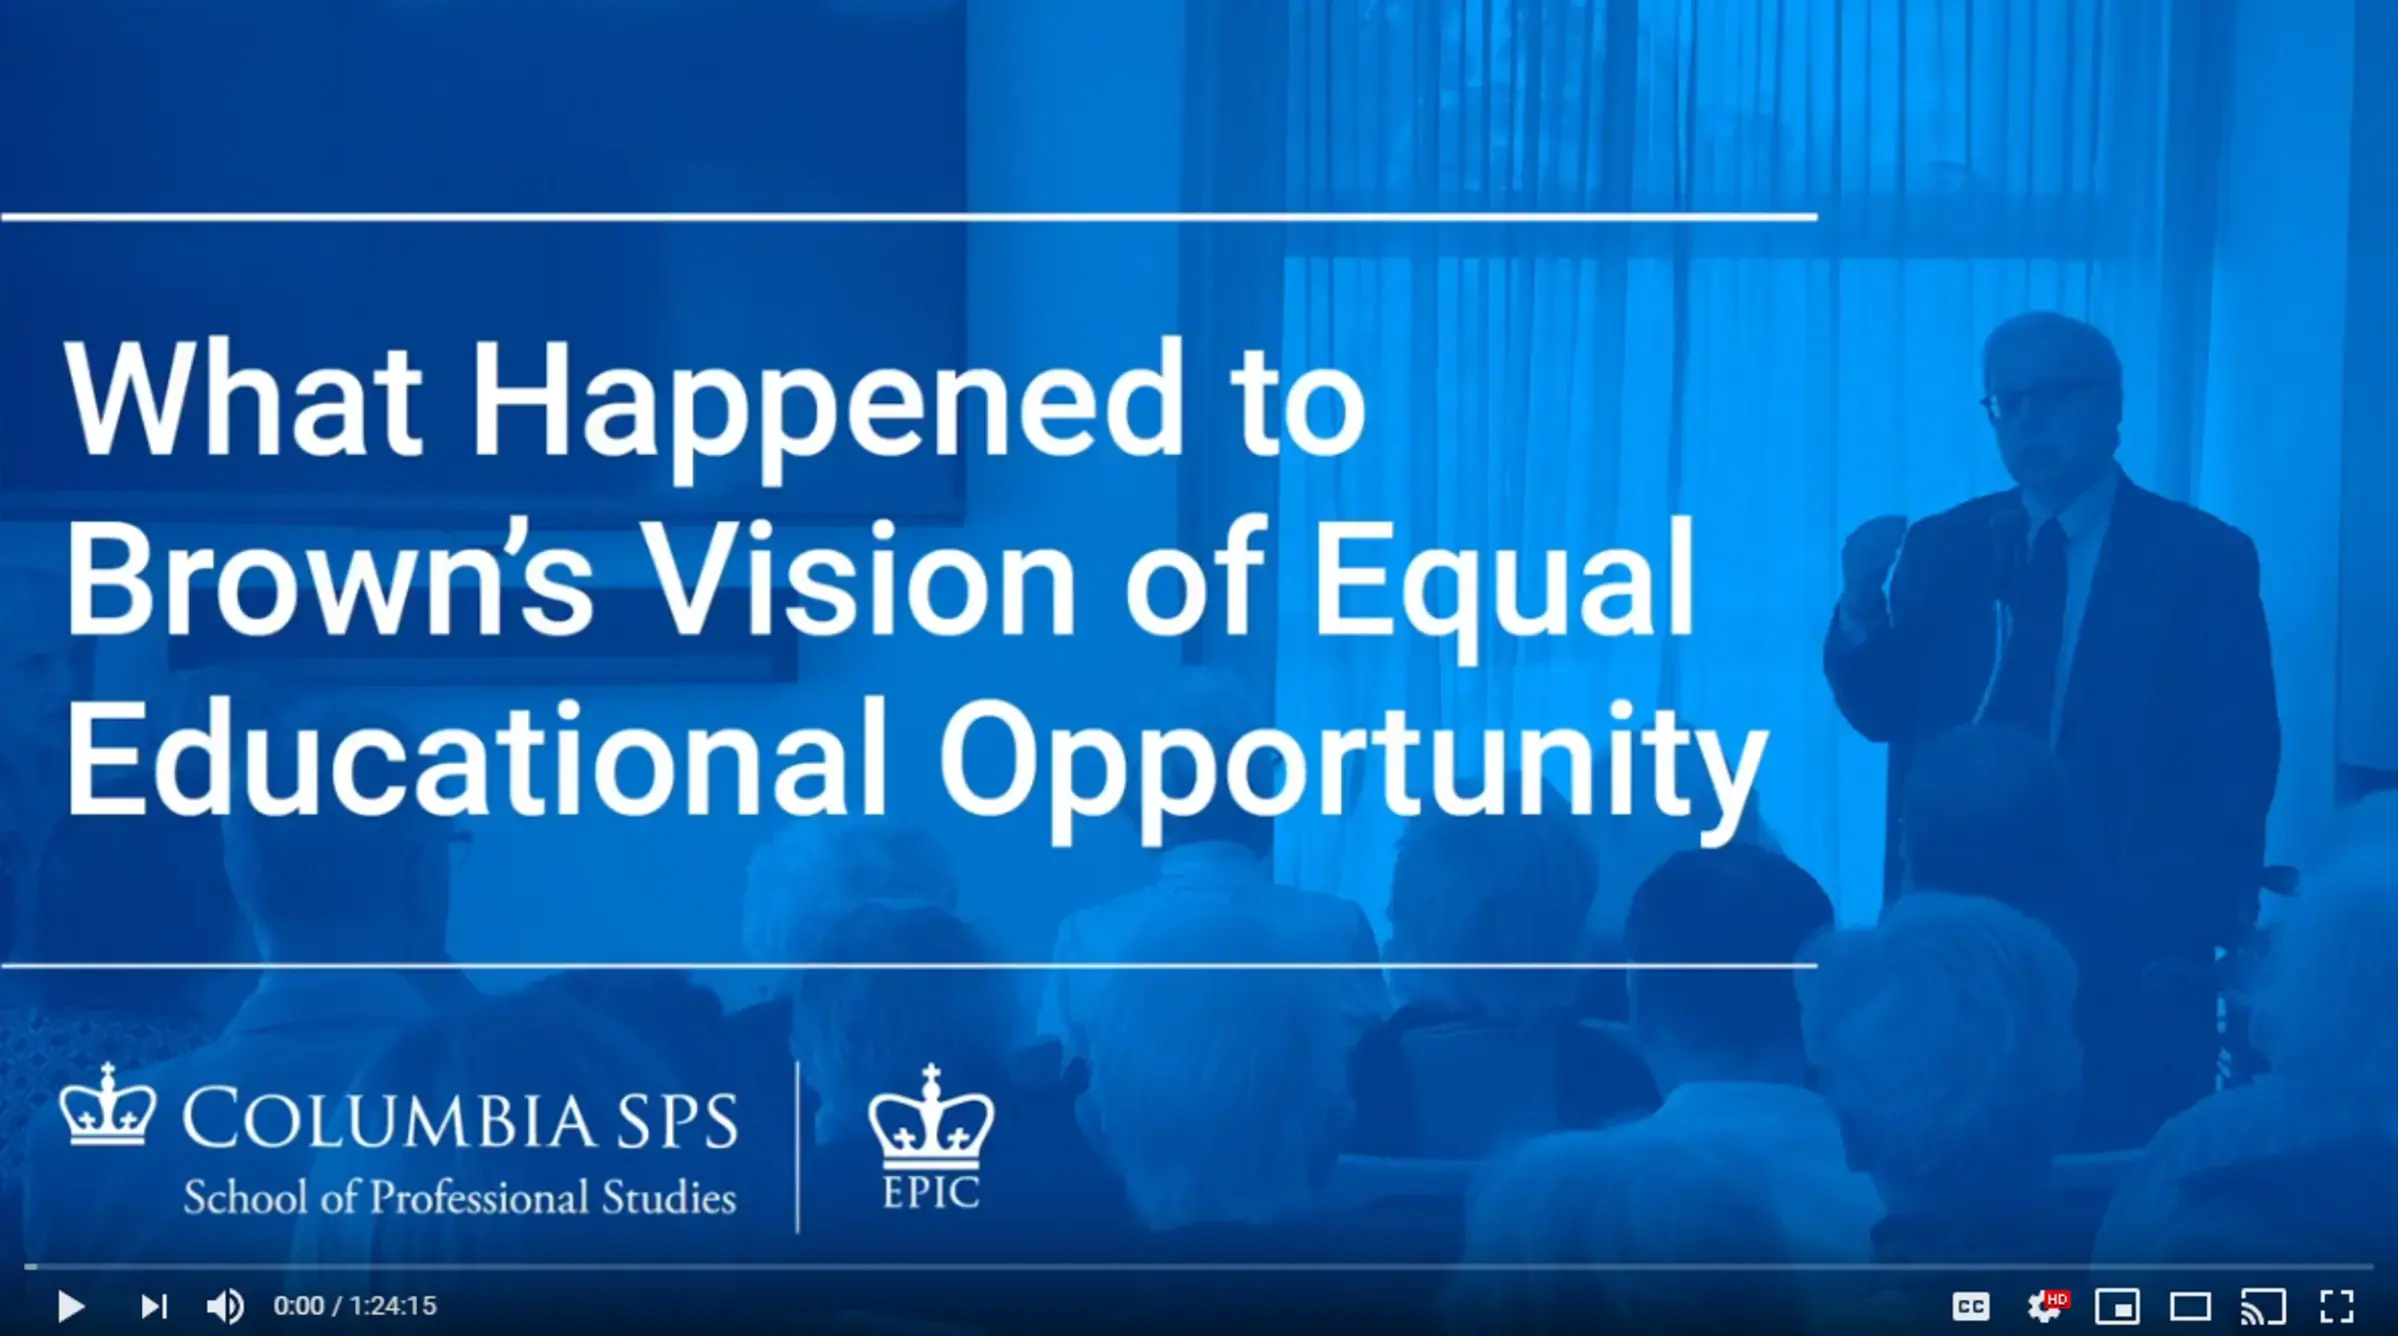 EPIC/SPS Talk: "What Happened to Brown’s Vision of Equal Educational Opportunity and How Can We Get Back on Course?"